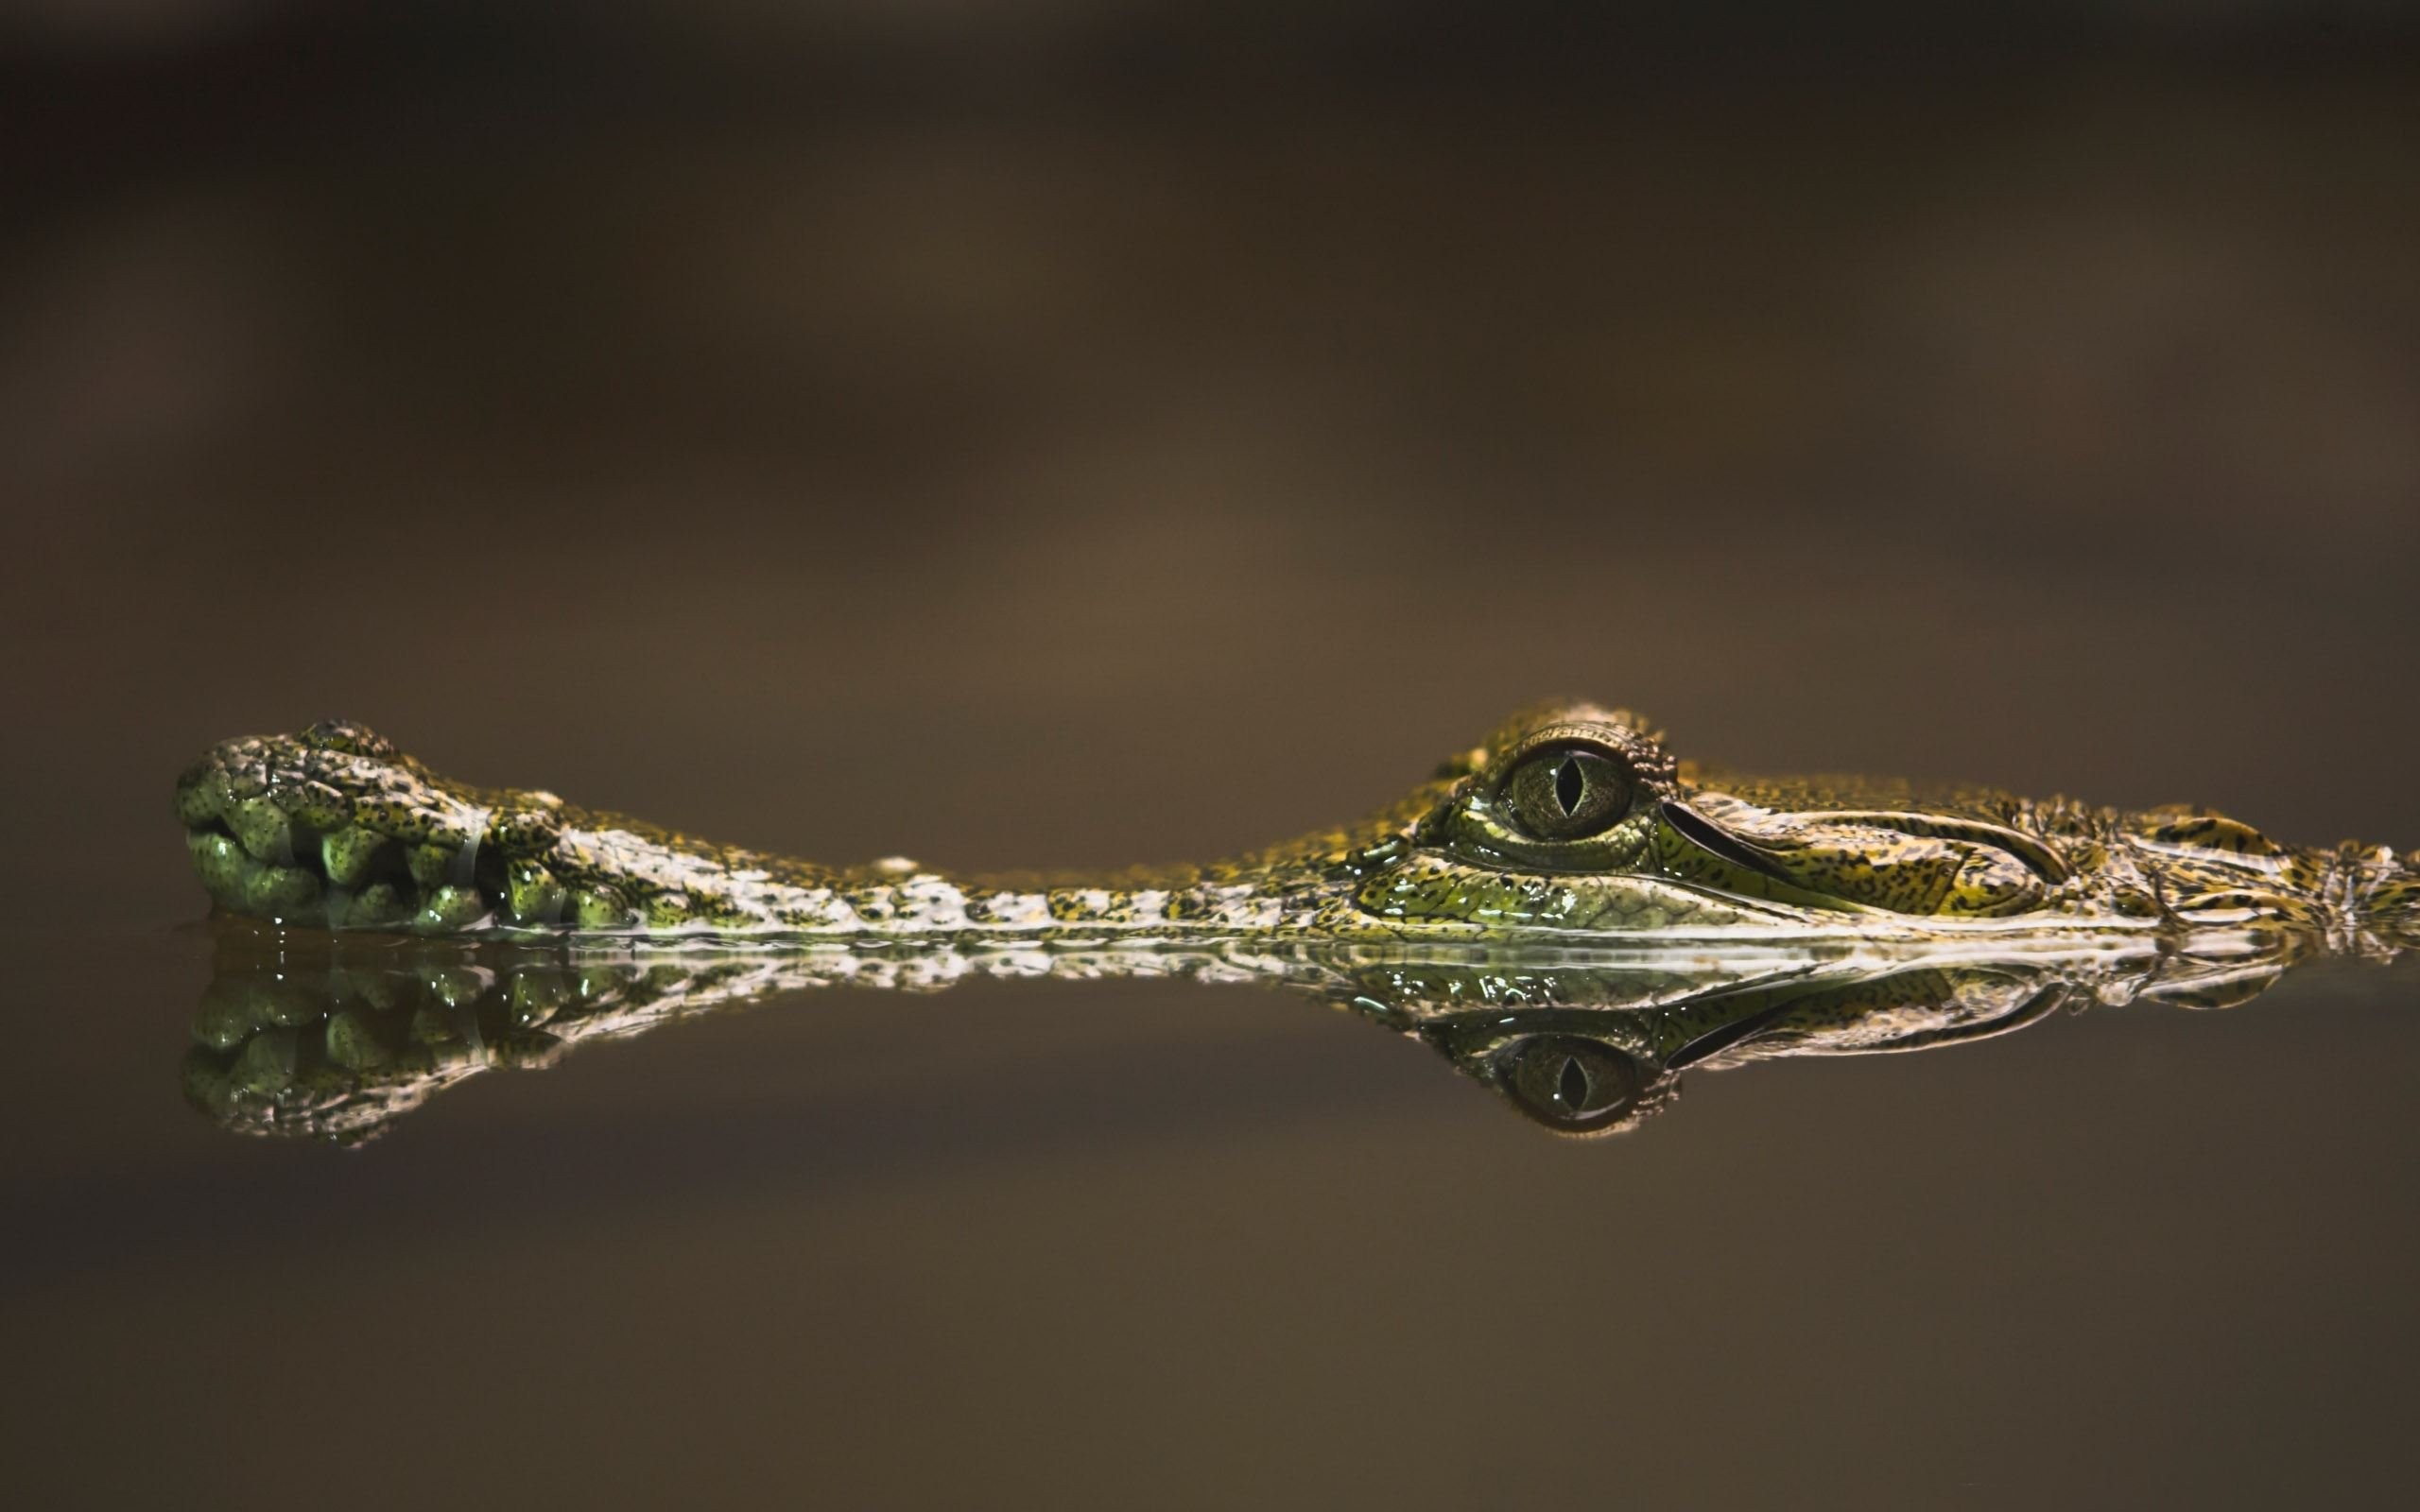 General 2560x1600 crocodiles reflection animals reptiles photography eyes in water animal eyes closeup